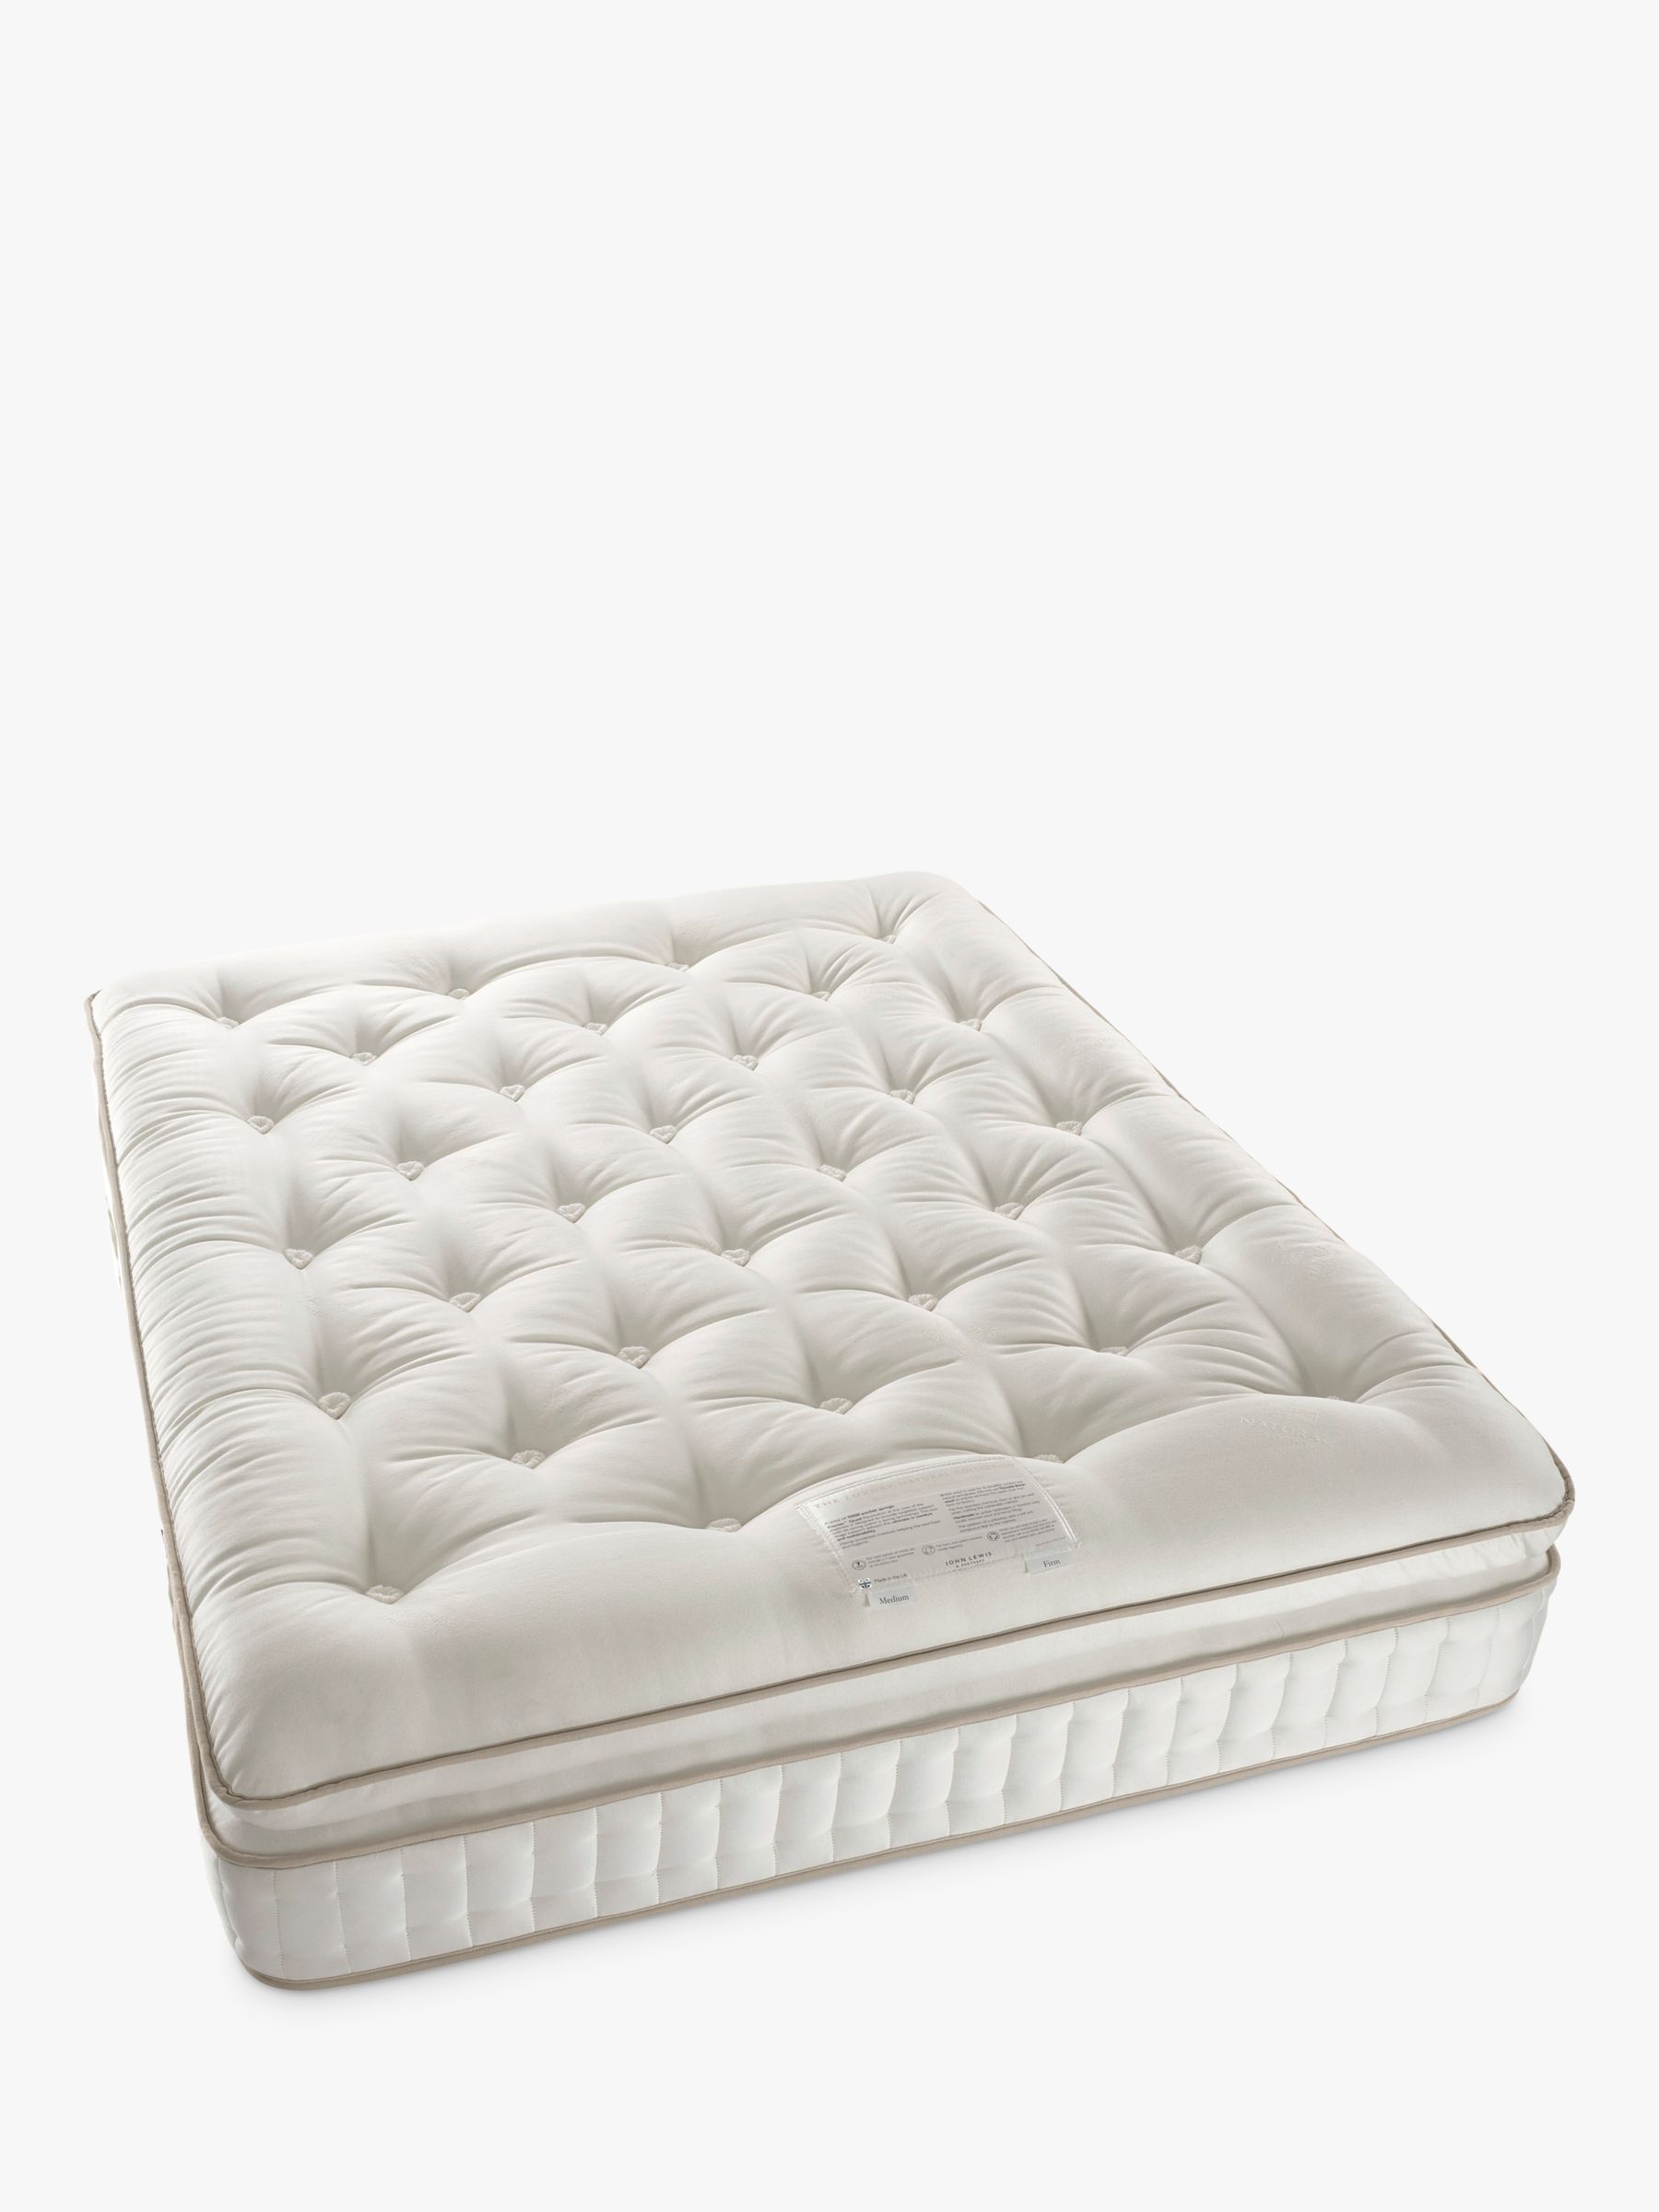 Photo of John lewis luxury natural collection british wool pillowtop 11000 double firmer tension pocket spring mattress